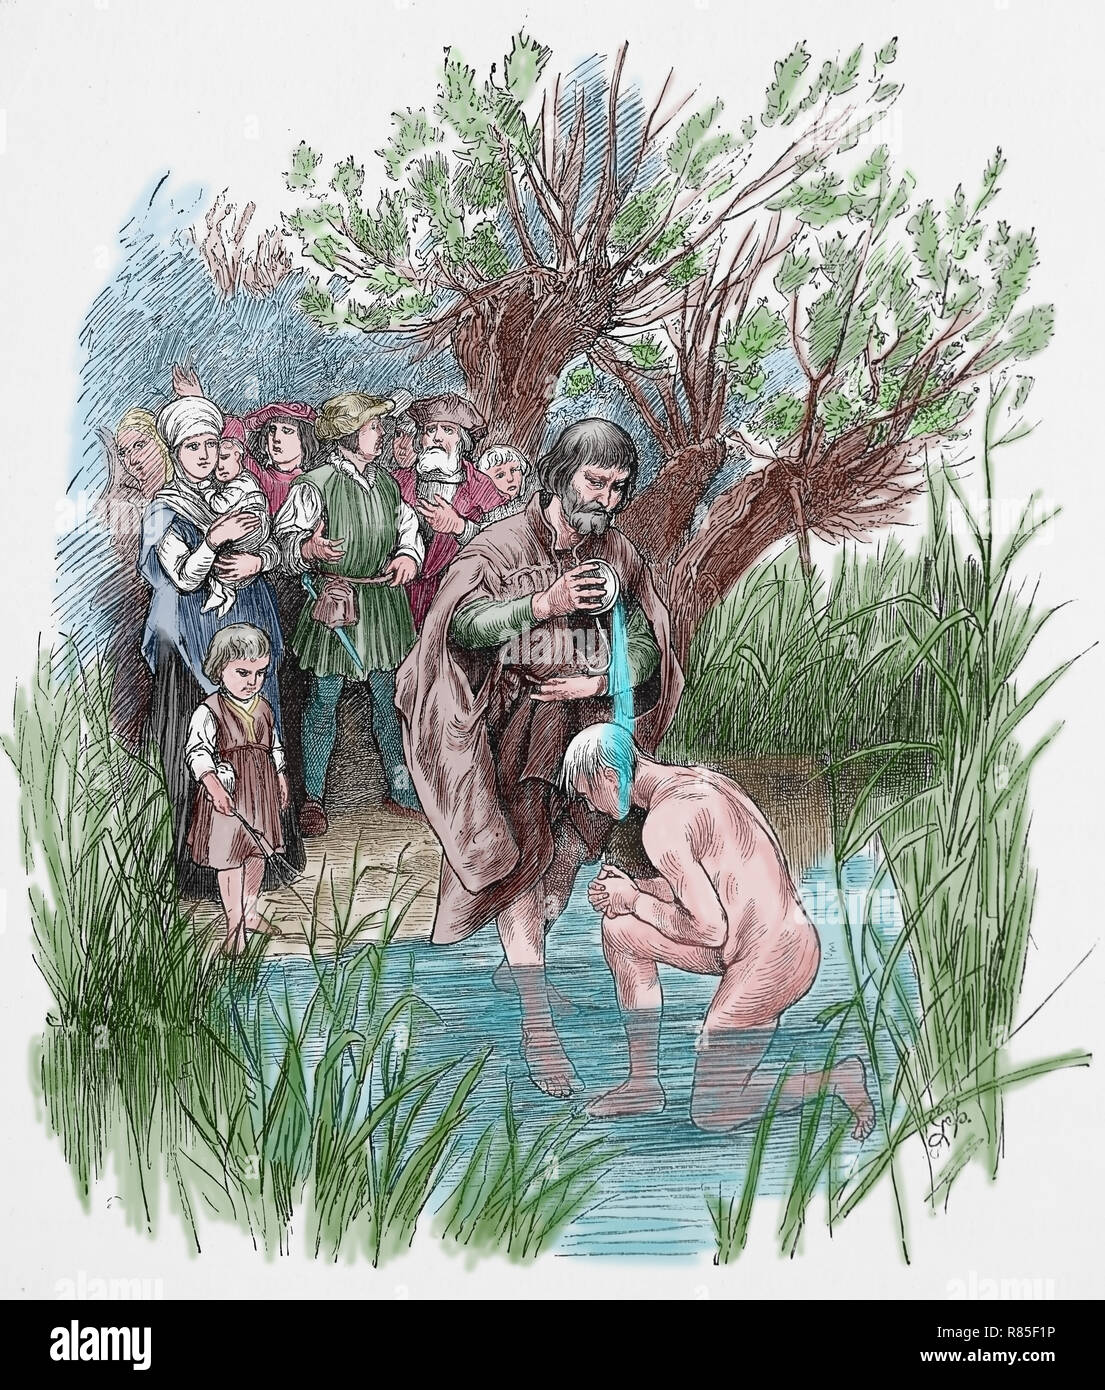 16th century. Europe. The Anabaptists. Adult baptism. Engraving by Germania, 1882. Stock Photo